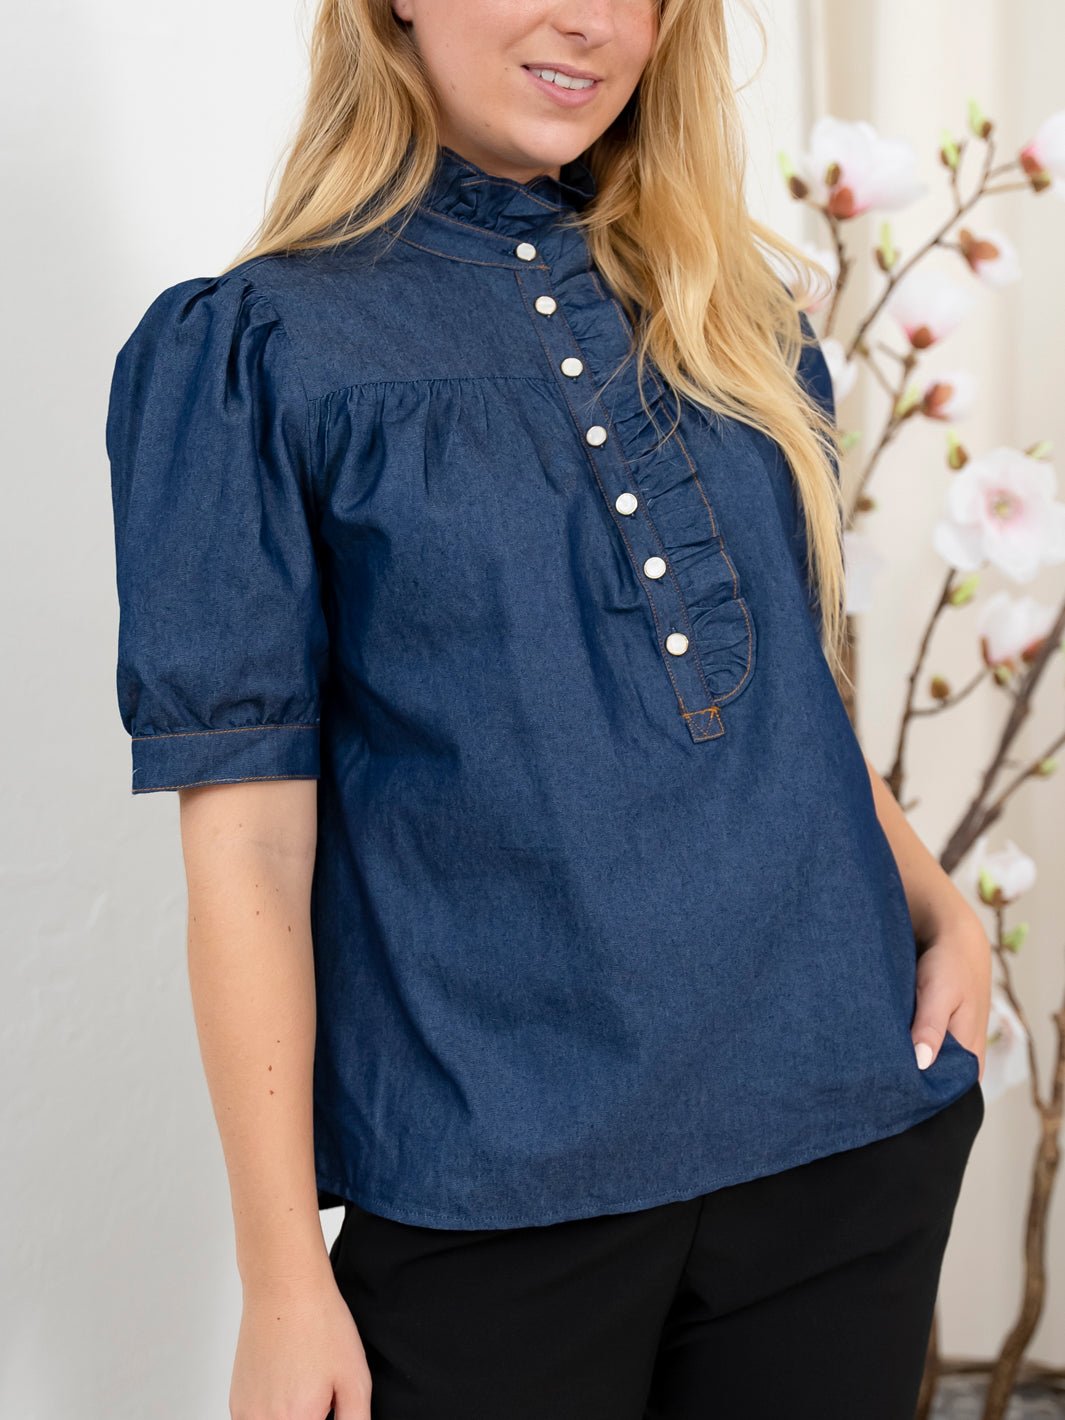 Continue Ariana SS chambre blouse dark blue - Online - Mode